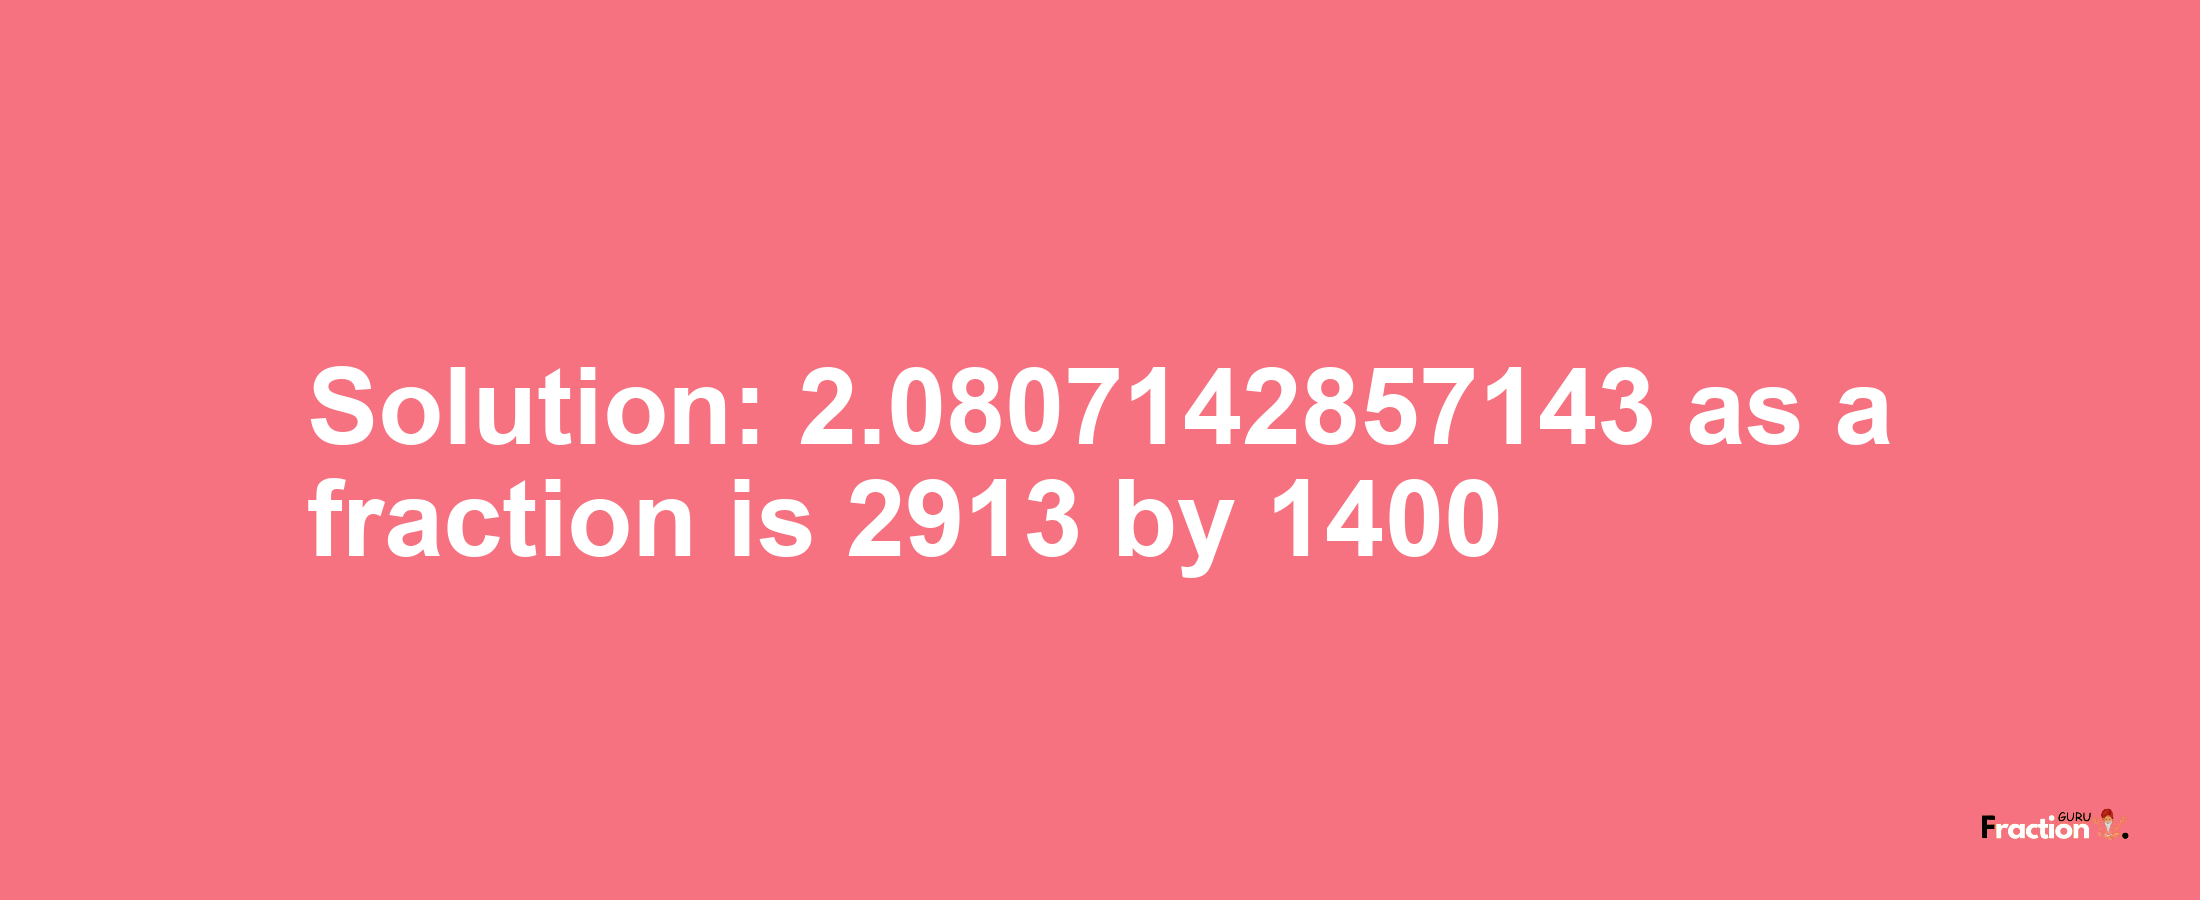 Solution:2.0807142857143 as a fraction is 2913/1400